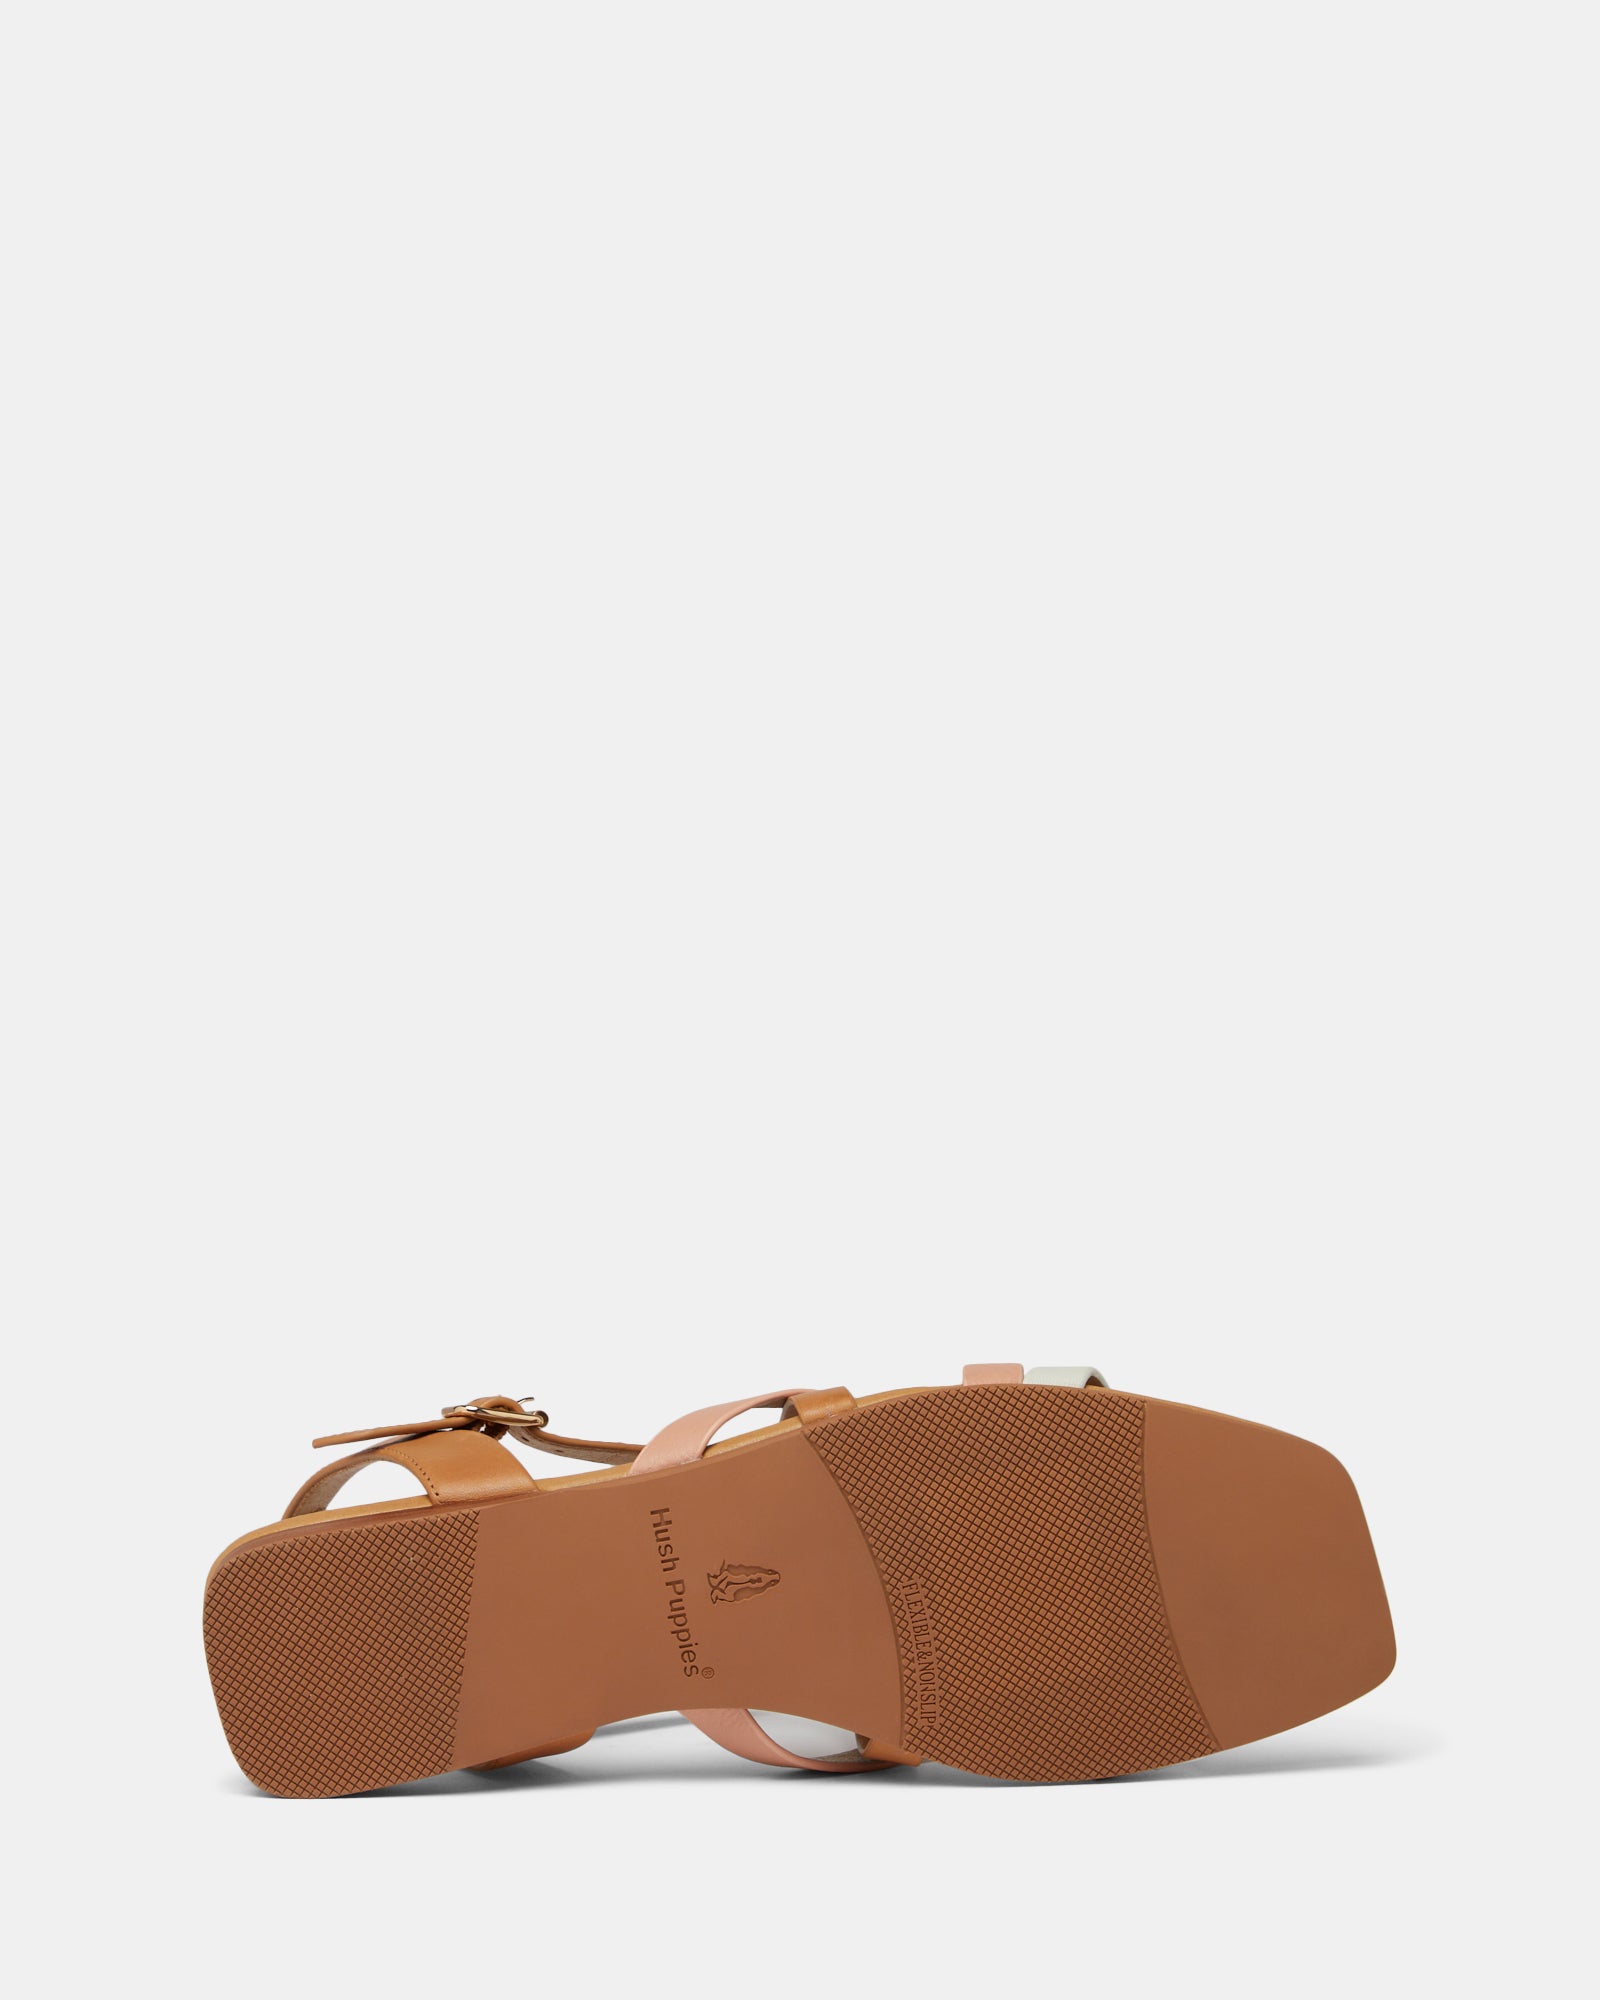 HUSH PUPPIES THE LOW SQUARE - Forbes Footwear